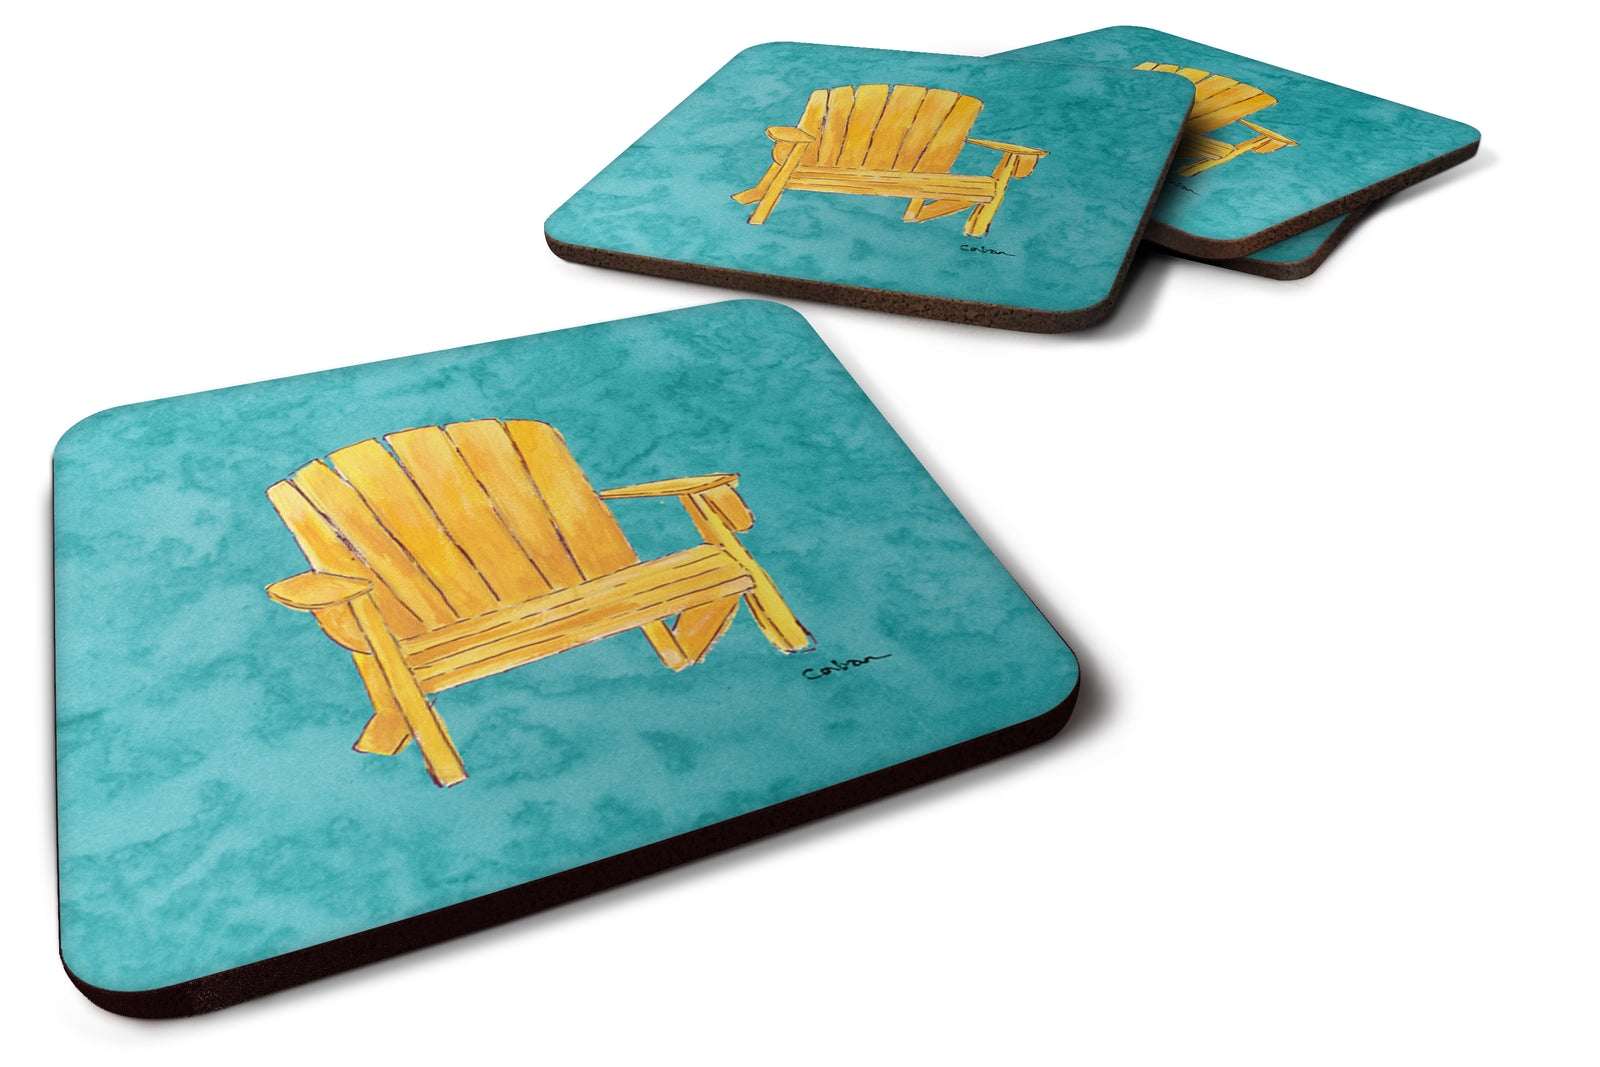 Set of 4 Welcome to the Trailer  Foam Coasters - the-store.com